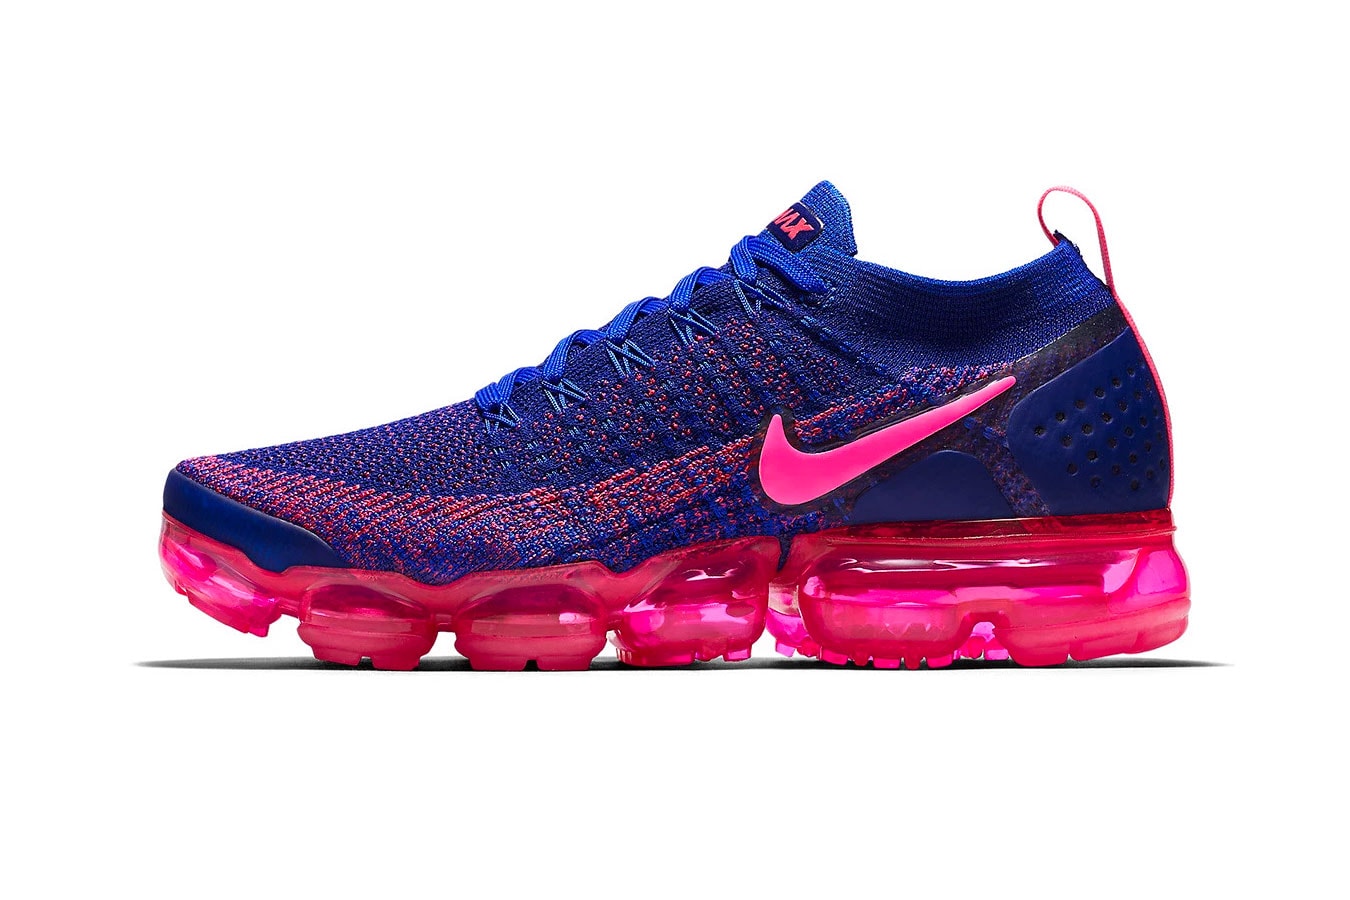 Nike Air VaporMax Flyknit 2.0 Racer Blue Release info Date Racer Pink Blue sneaker colorway price